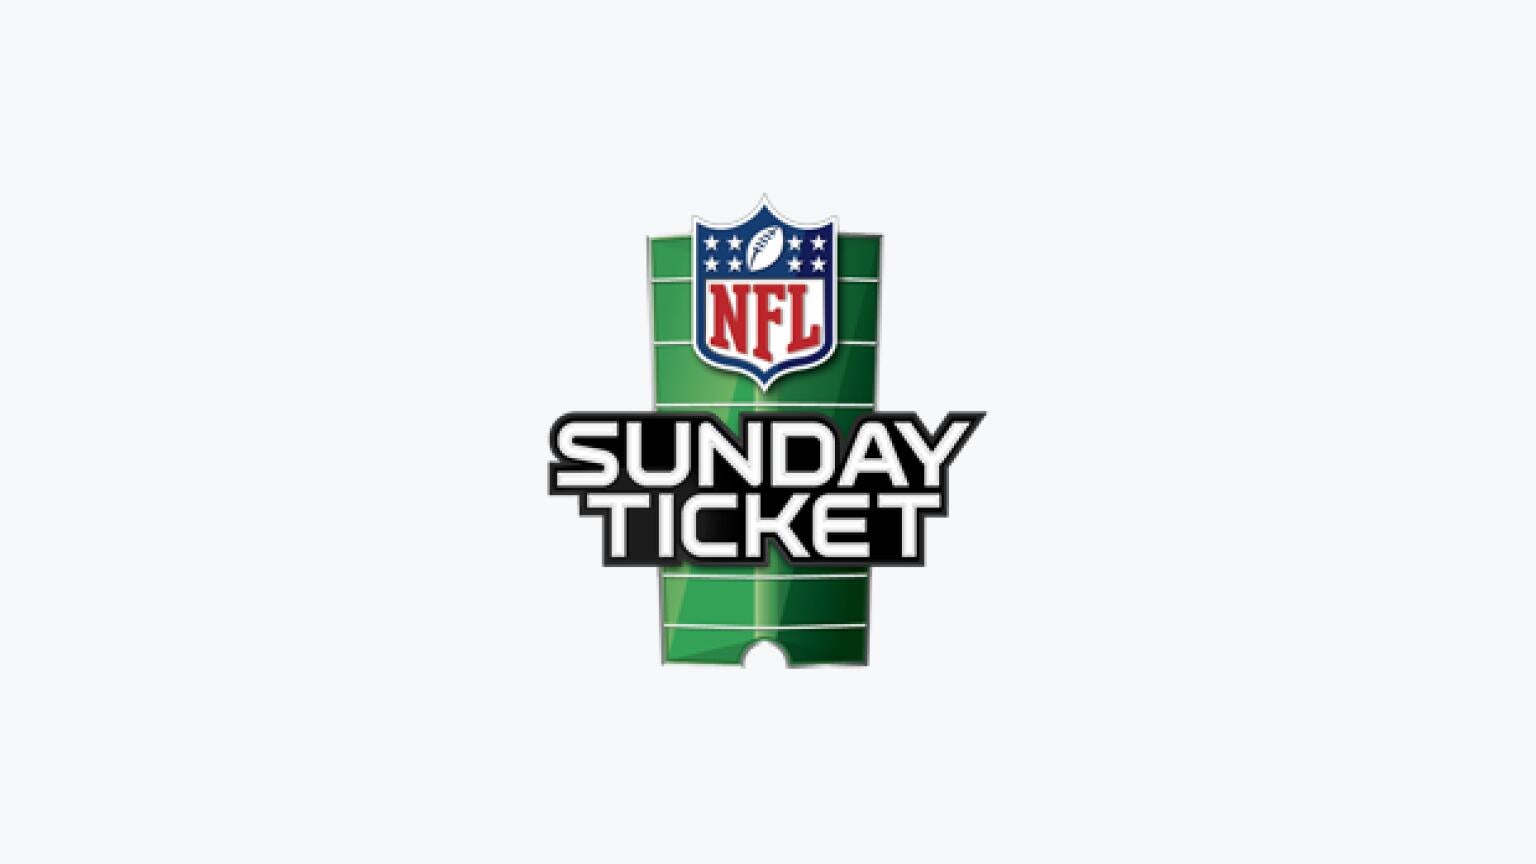 Report: Apple 'most likely' winning bidder for NFL Sunday Ticket